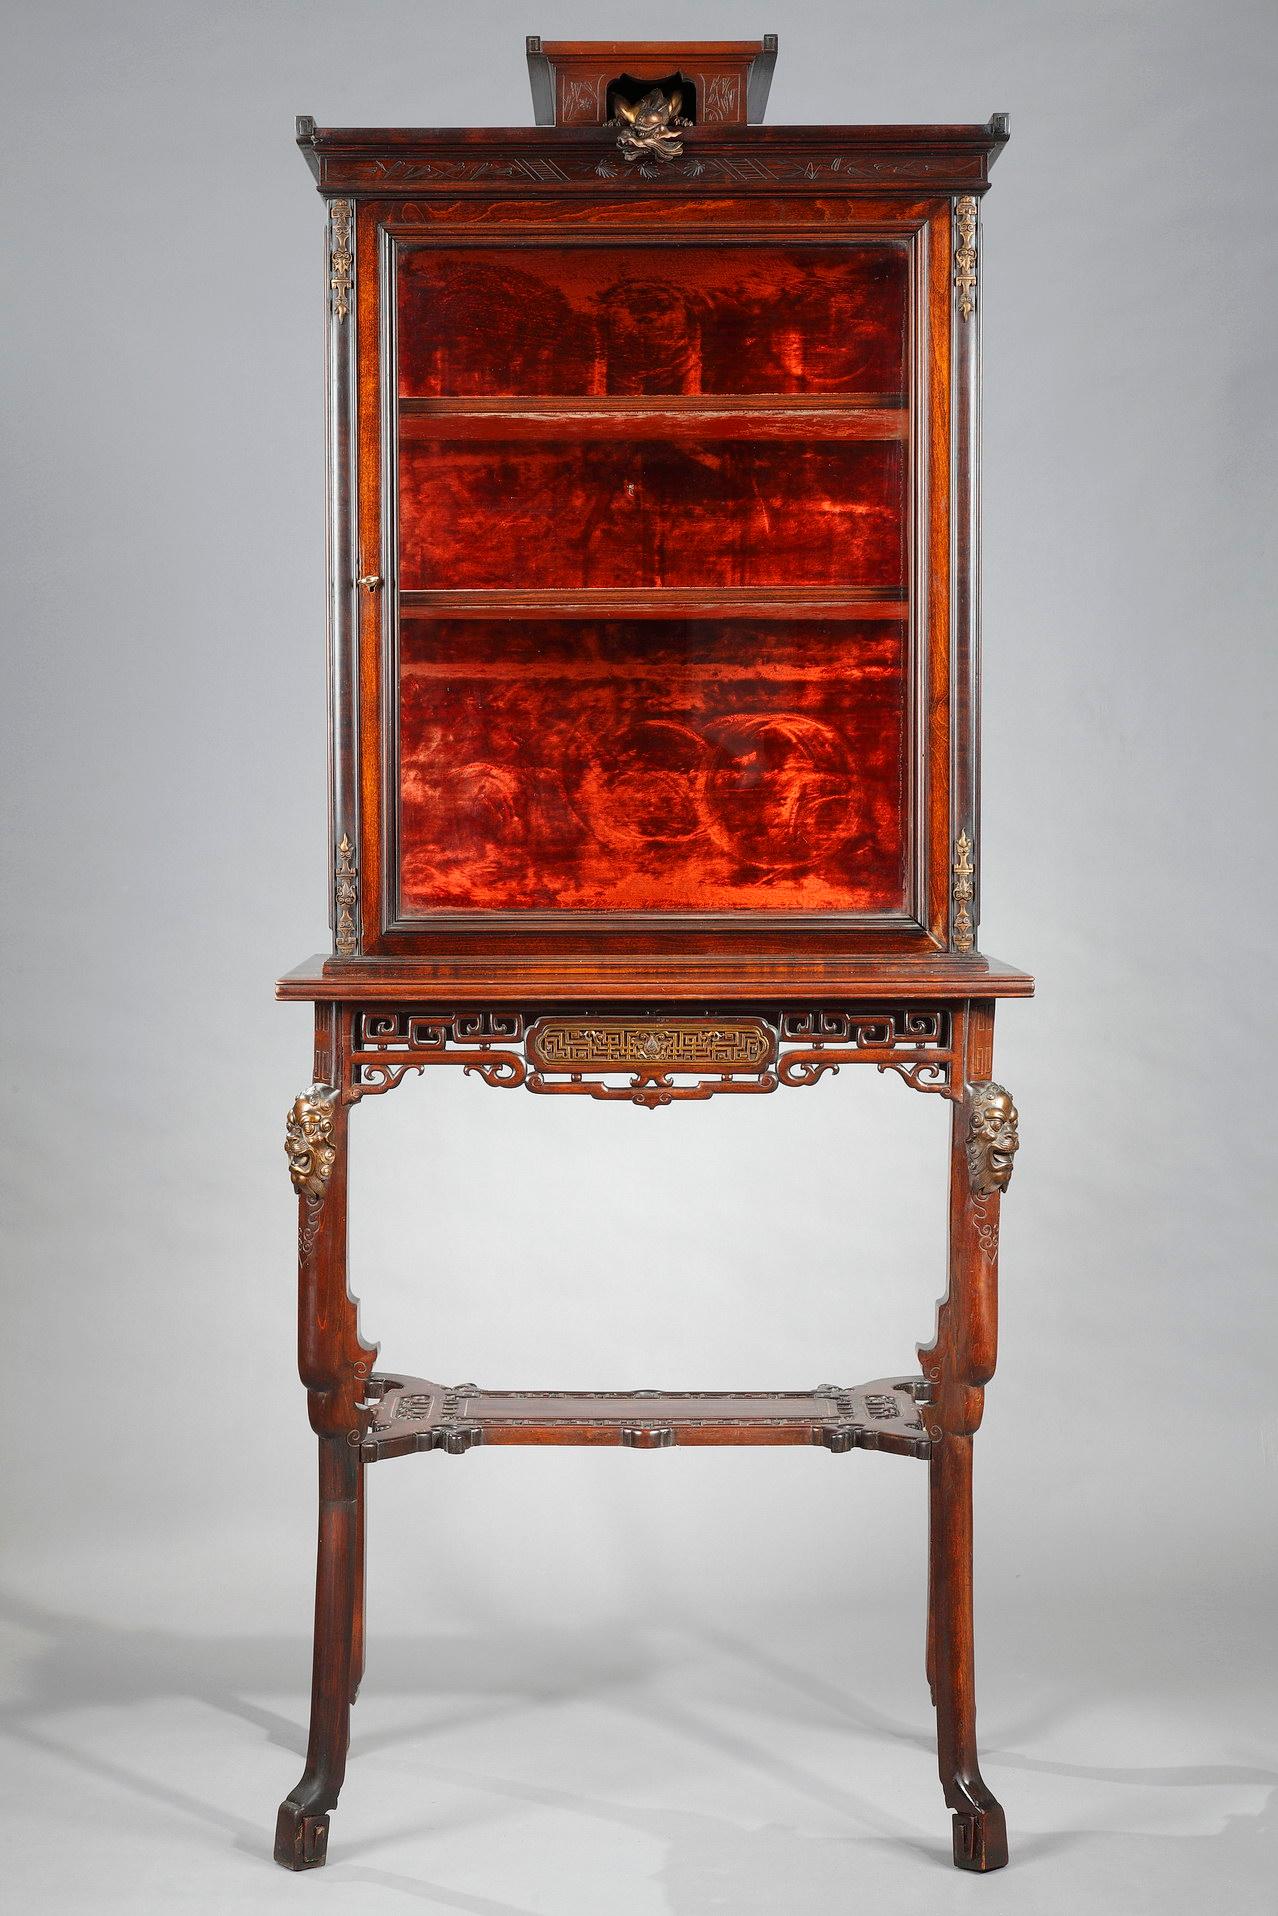 Beautiful Japanese style vitrine made in carved and engraved tinted alder, attributed to G. Viardot. It opens on the upper part with a door revealing two shelves on a crimson velvet background, framed by pilasters adorned with decorative patinated